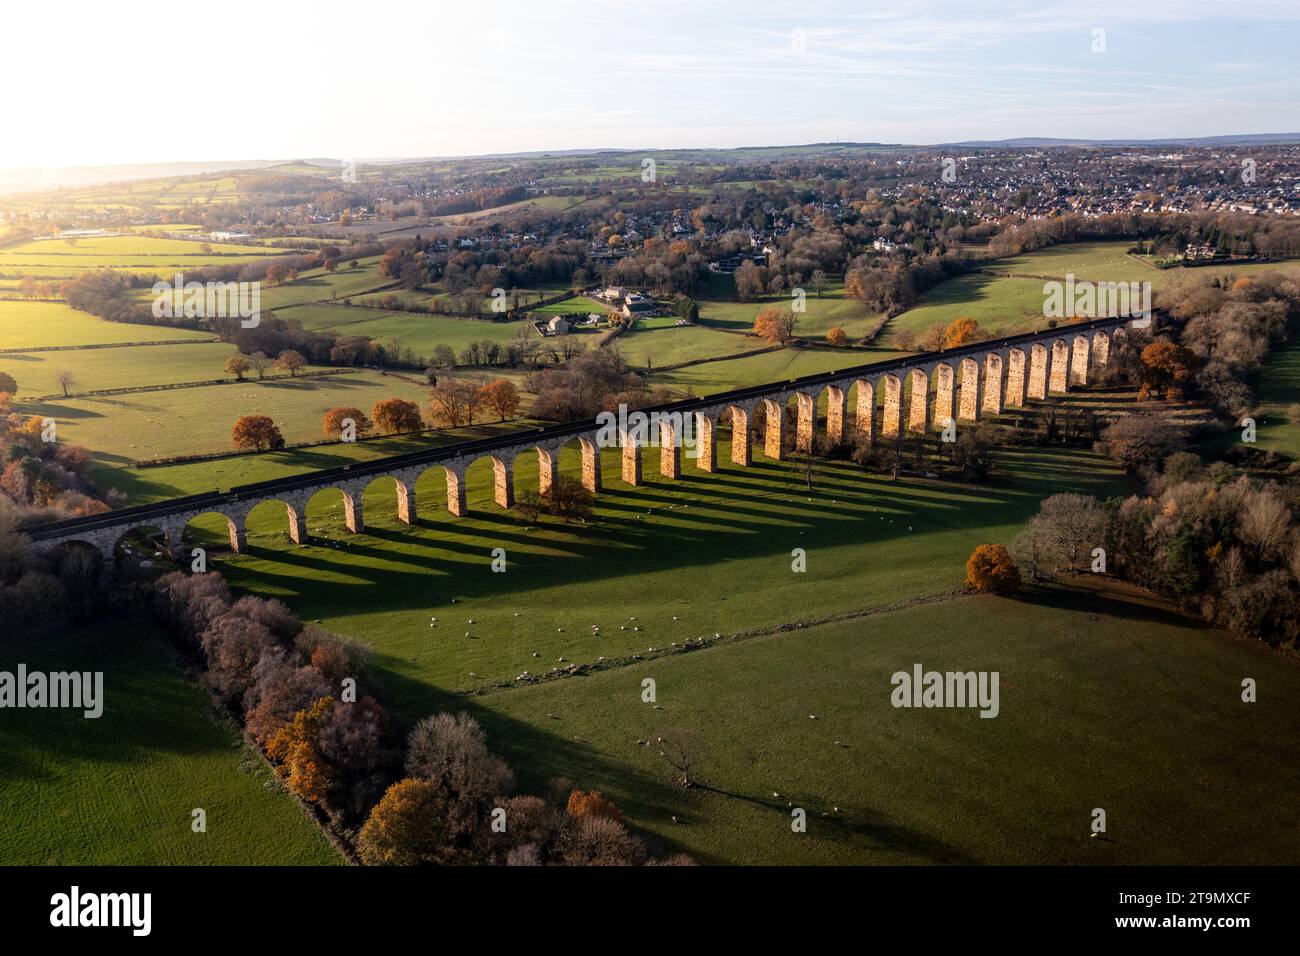 An aerial landscape high above the historic Crimple Valley Viaduct bridge with multiple arches near the Yorkshire Dales town of Harrogate at sunset Stock Photo